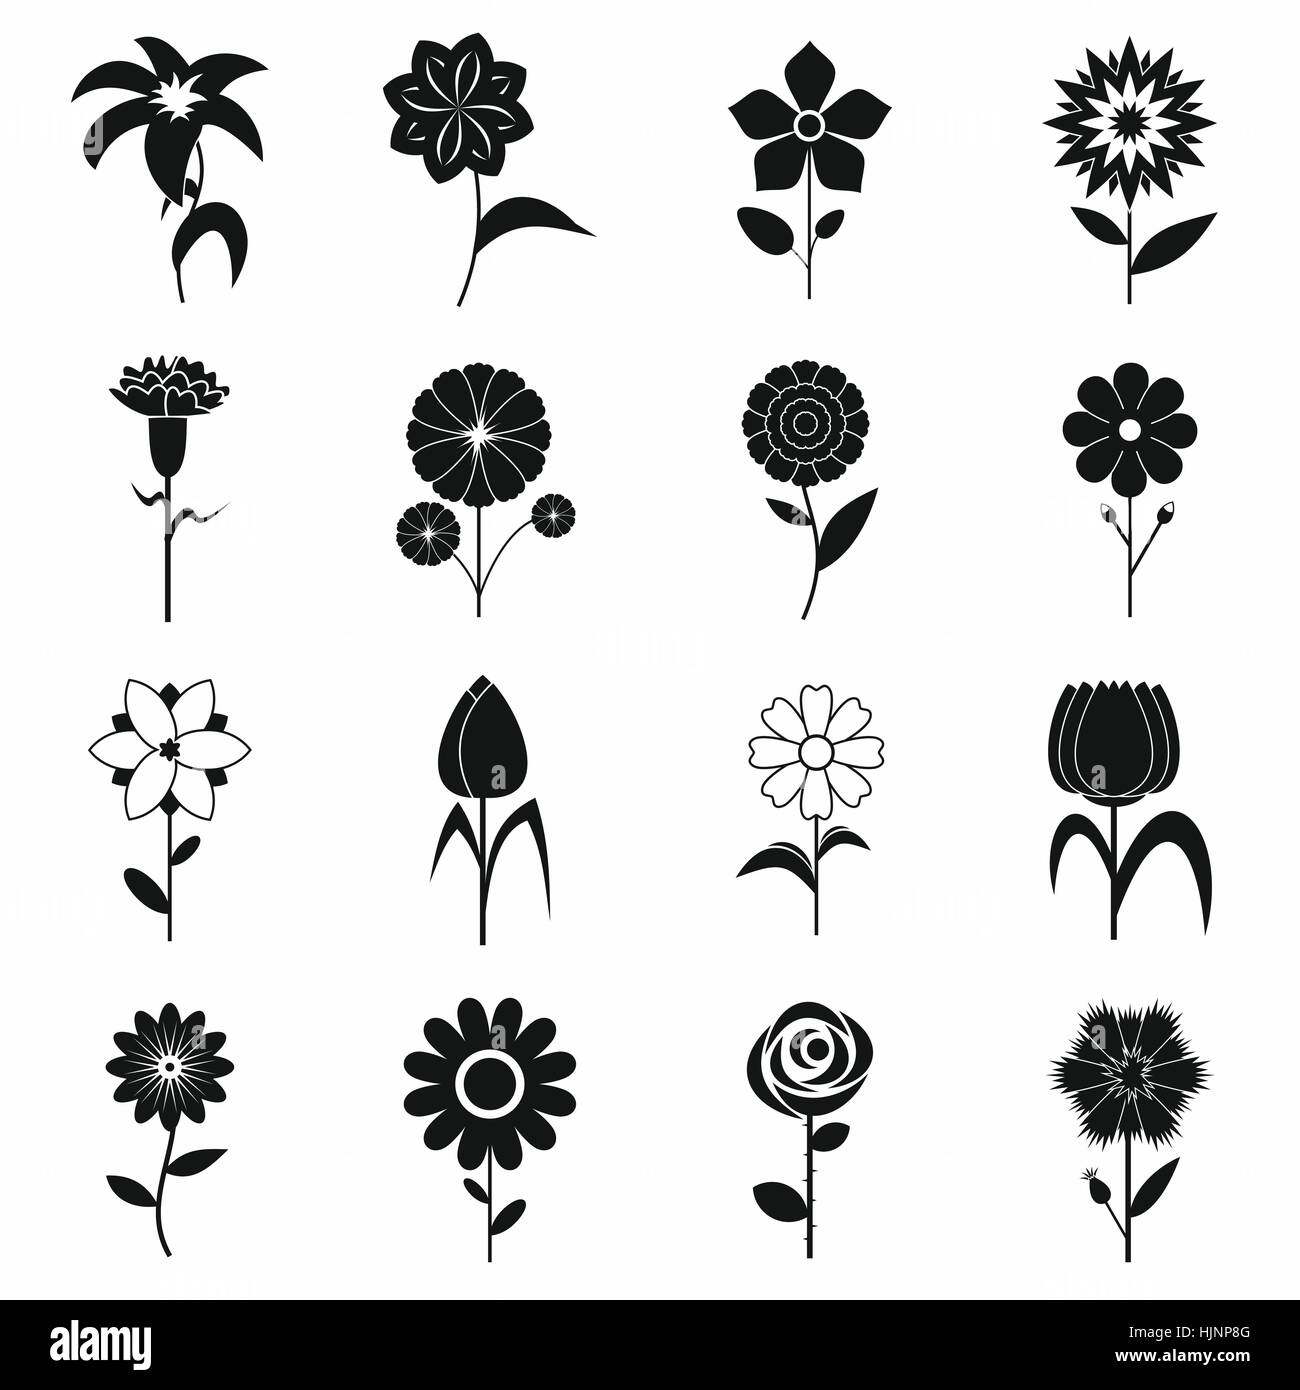 Featured image of post Easy Flower Design Black And White : Black white flower wall art print unframed 8x10, simple brush drawing floral poster for visual art decor 3 pieces black and white abatract transparent flowers picture canvas prints elegant floral simple prime video direct video distribution made easy.